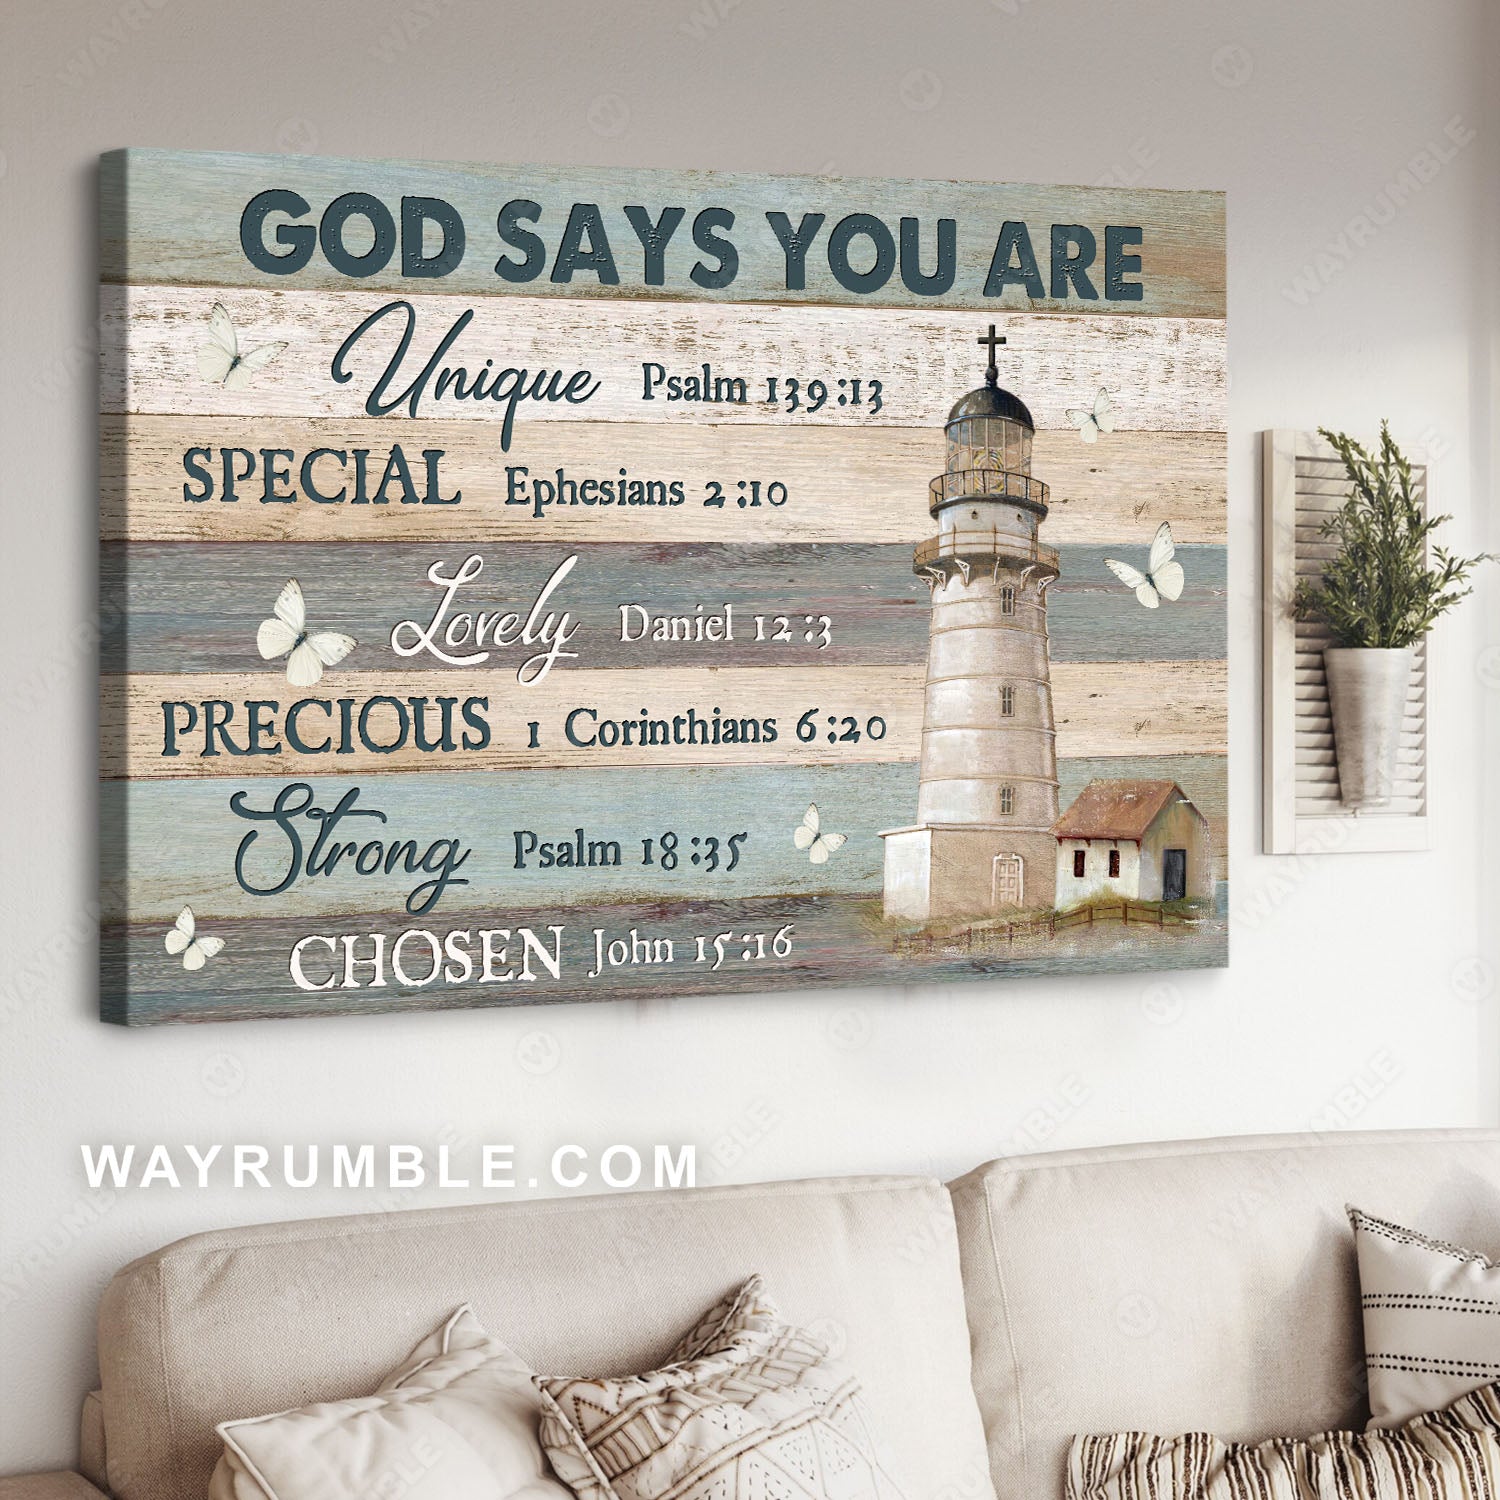 Light house. Flying butterfly, Wood plank texture, God says you are unique - Jesus Landscape Canvas Prints, Christian Wall Art